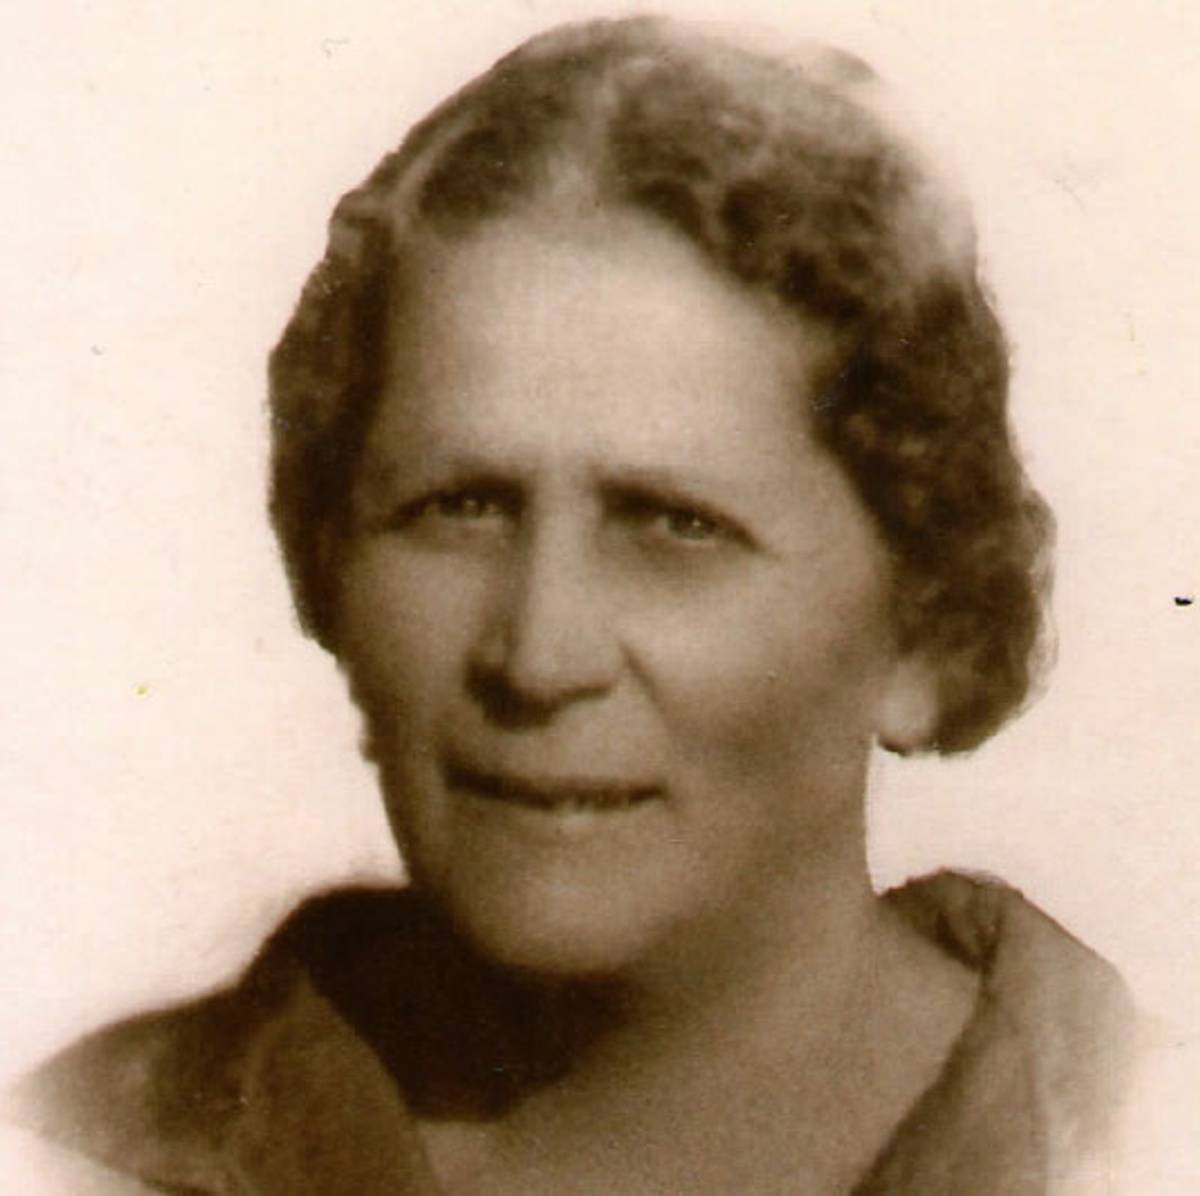 Rivca Alhadeff, the author’s great-great-grandmother, was born on the island of Rhodes in 1870 and died at Auschwitz in 1944, photo undated. (All photos courtesy the author.)